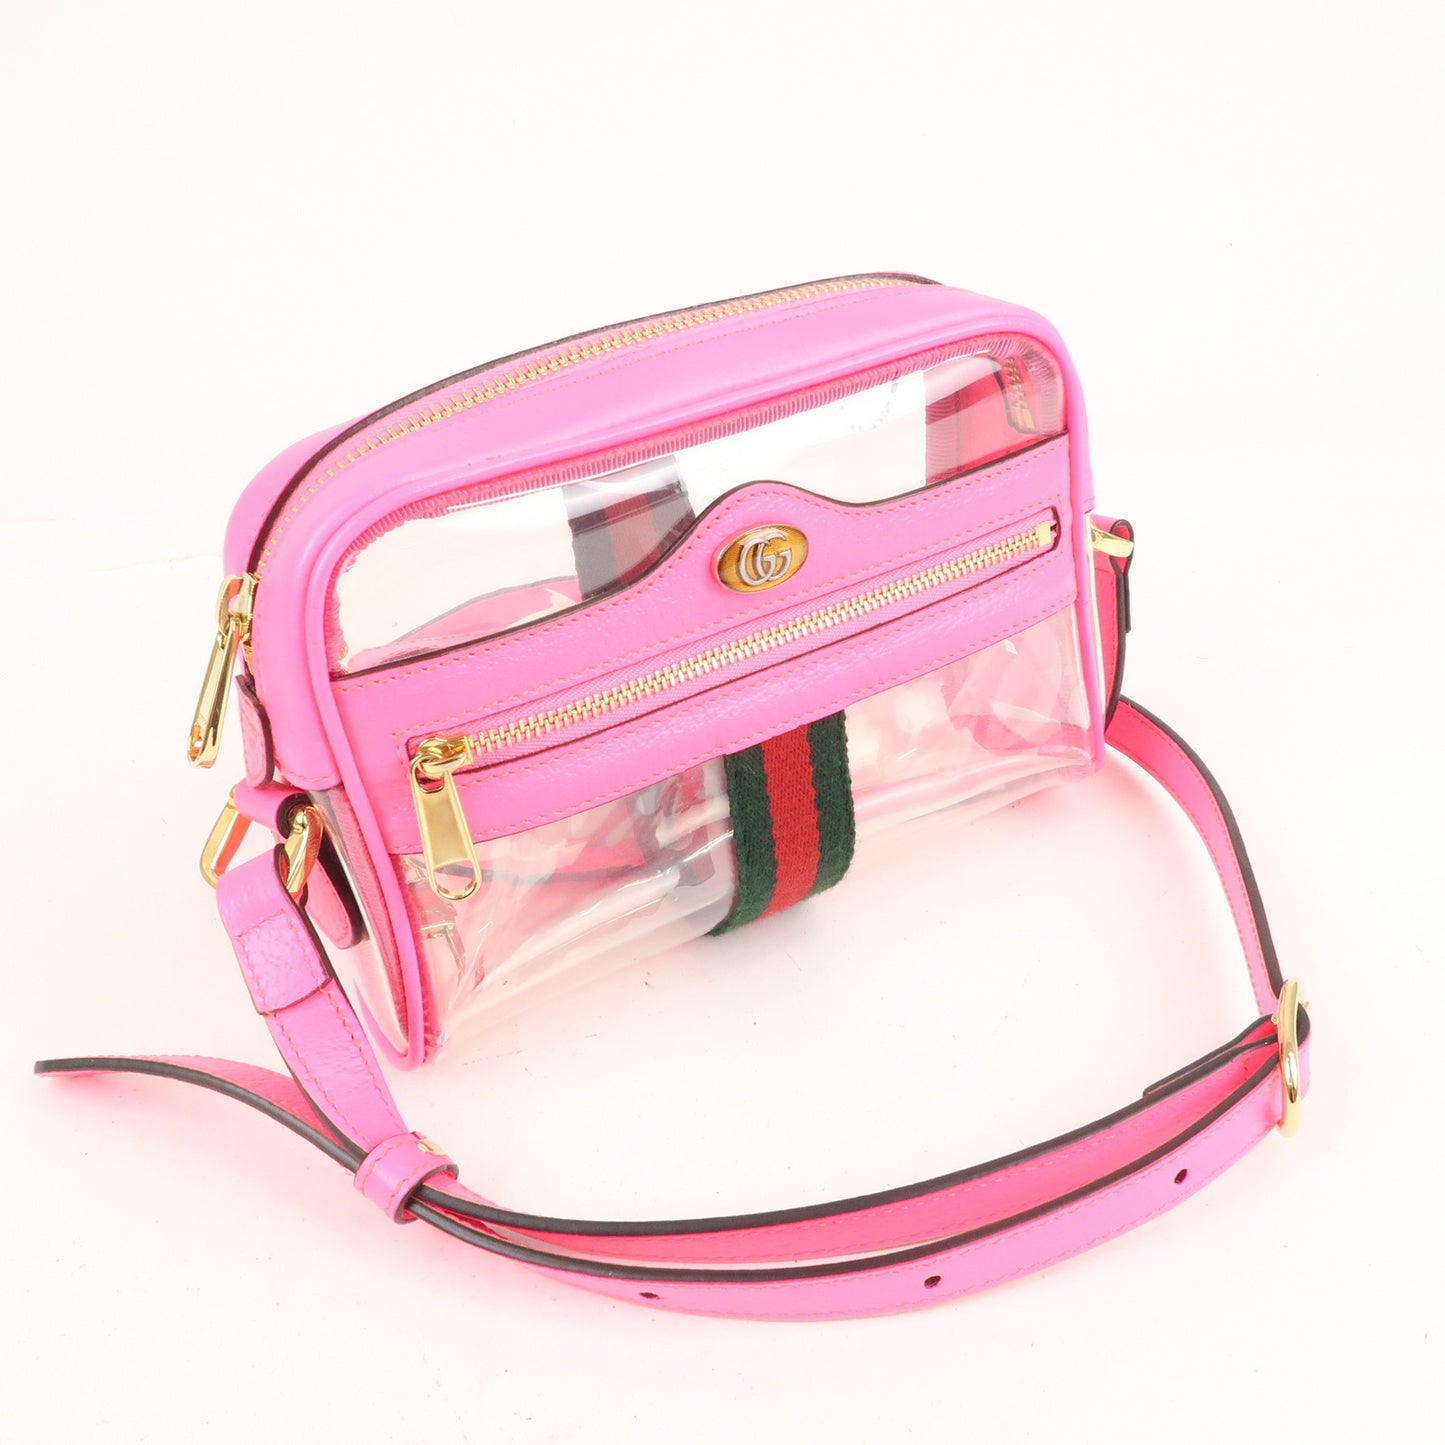 GUCCI Sherry Ophidia Vinyl Leather Clear Shoulder Bag Pink 517350